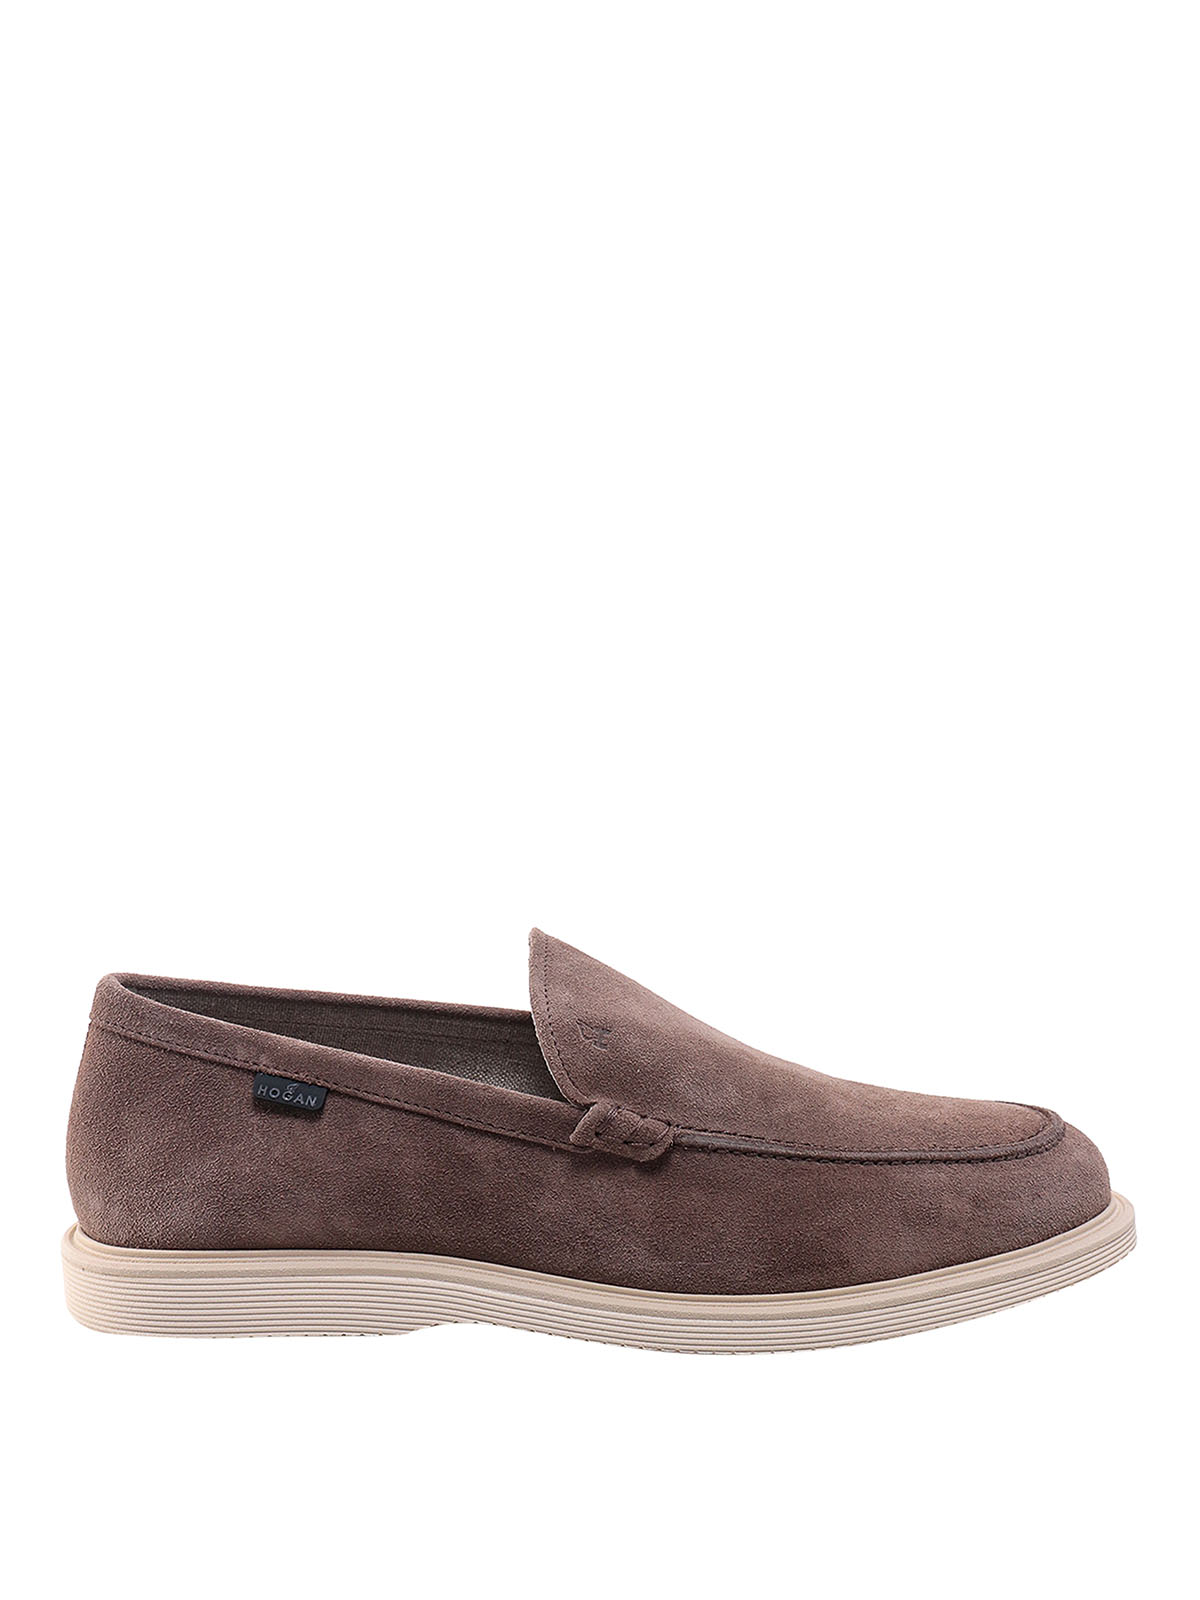 Hogan Suede Loafer With Rubber Sole In Marrón